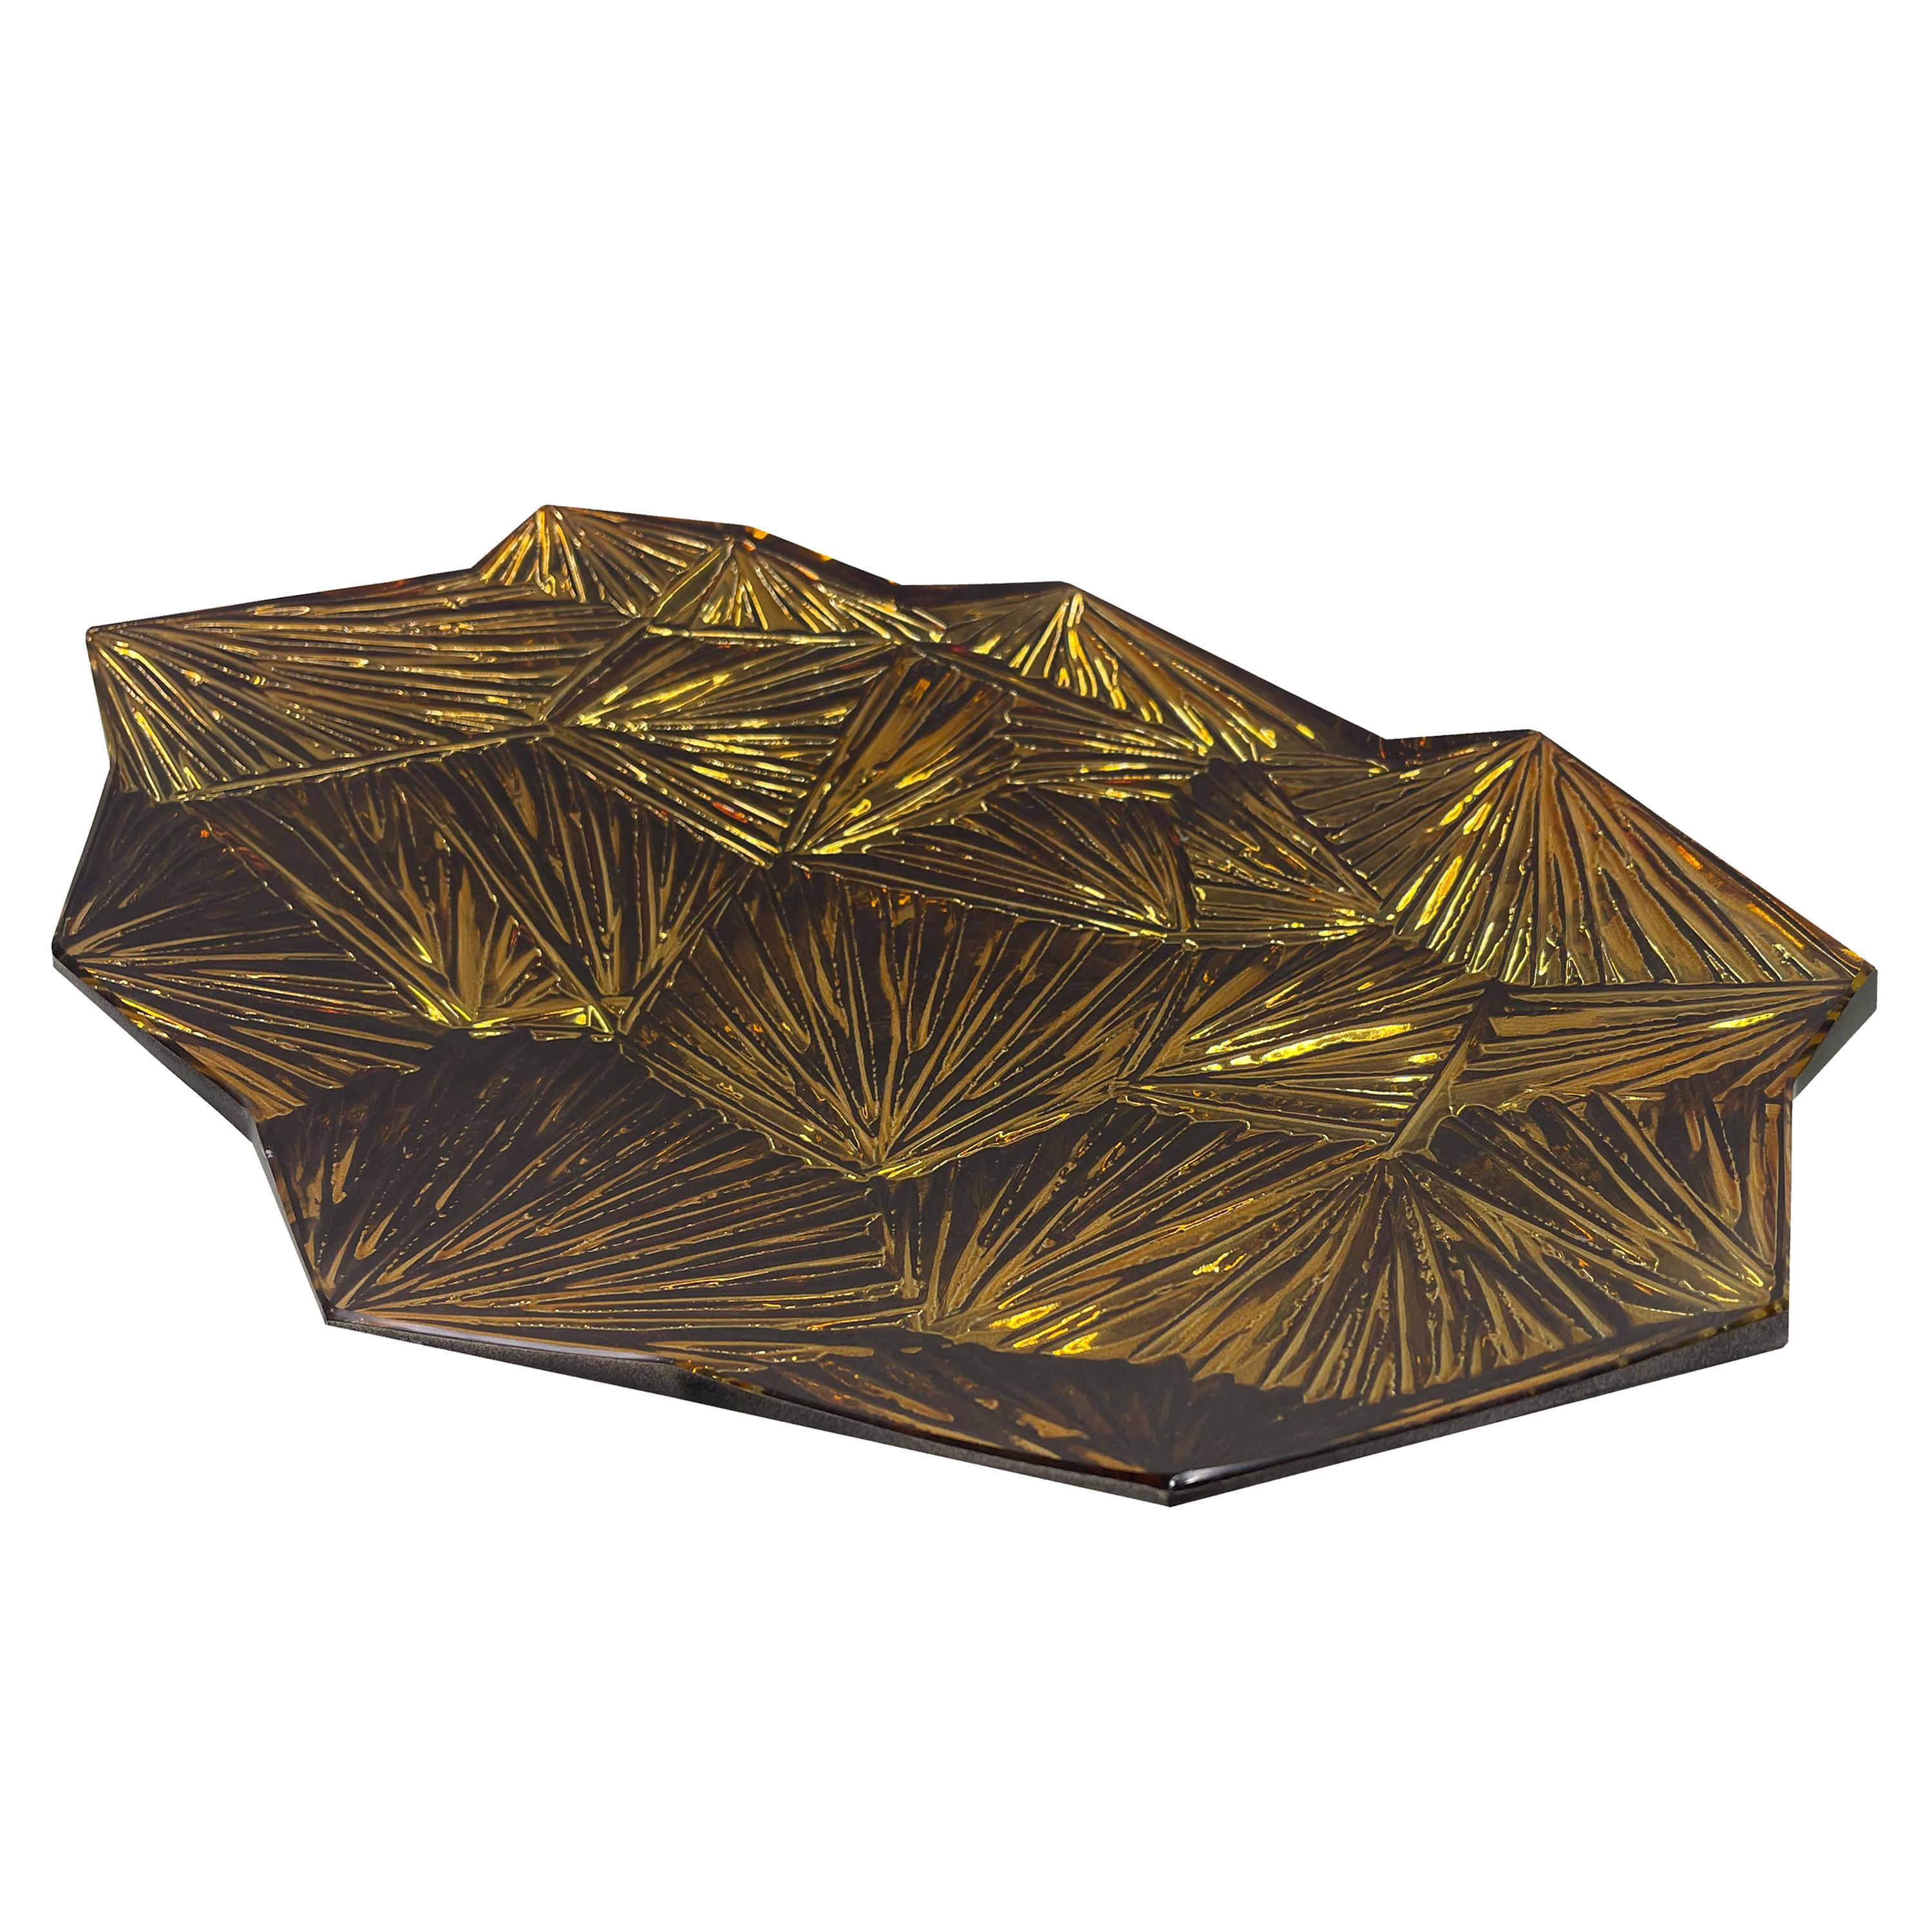 Contemporary 'Amber' Artistic Bowl Amber and Gold Crystal by Ghirò Studio